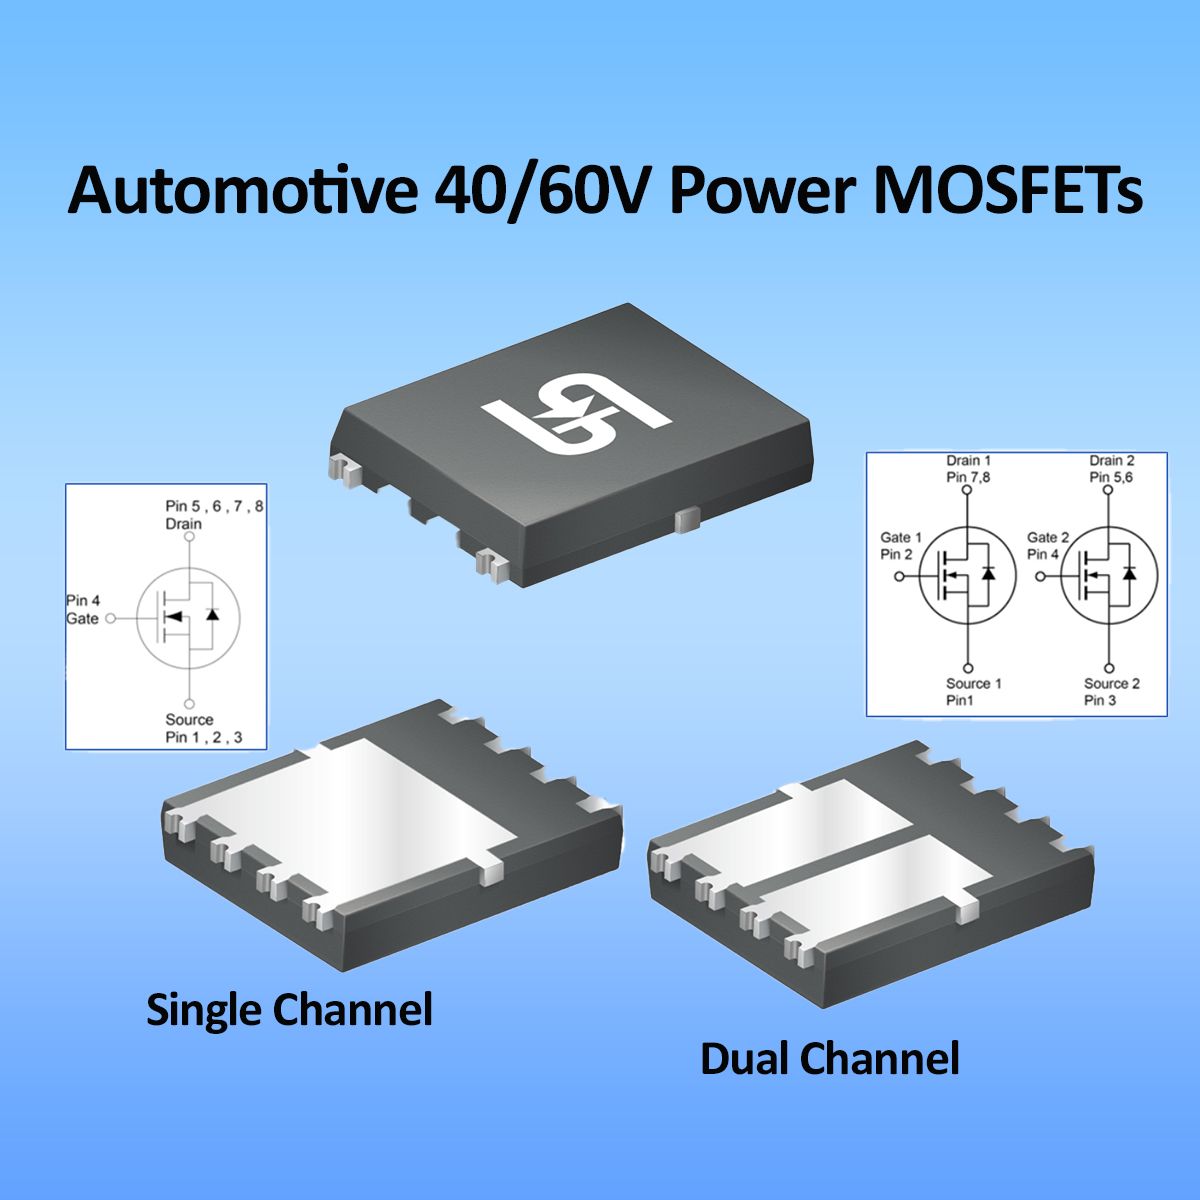 5 A MDmesh M2 Power MOSFET in a PowerFLAT 5x5 HV Package Pack of 100 STL7N60M2 0.92 Ohm typ MOSFET N-Channel 600 V 